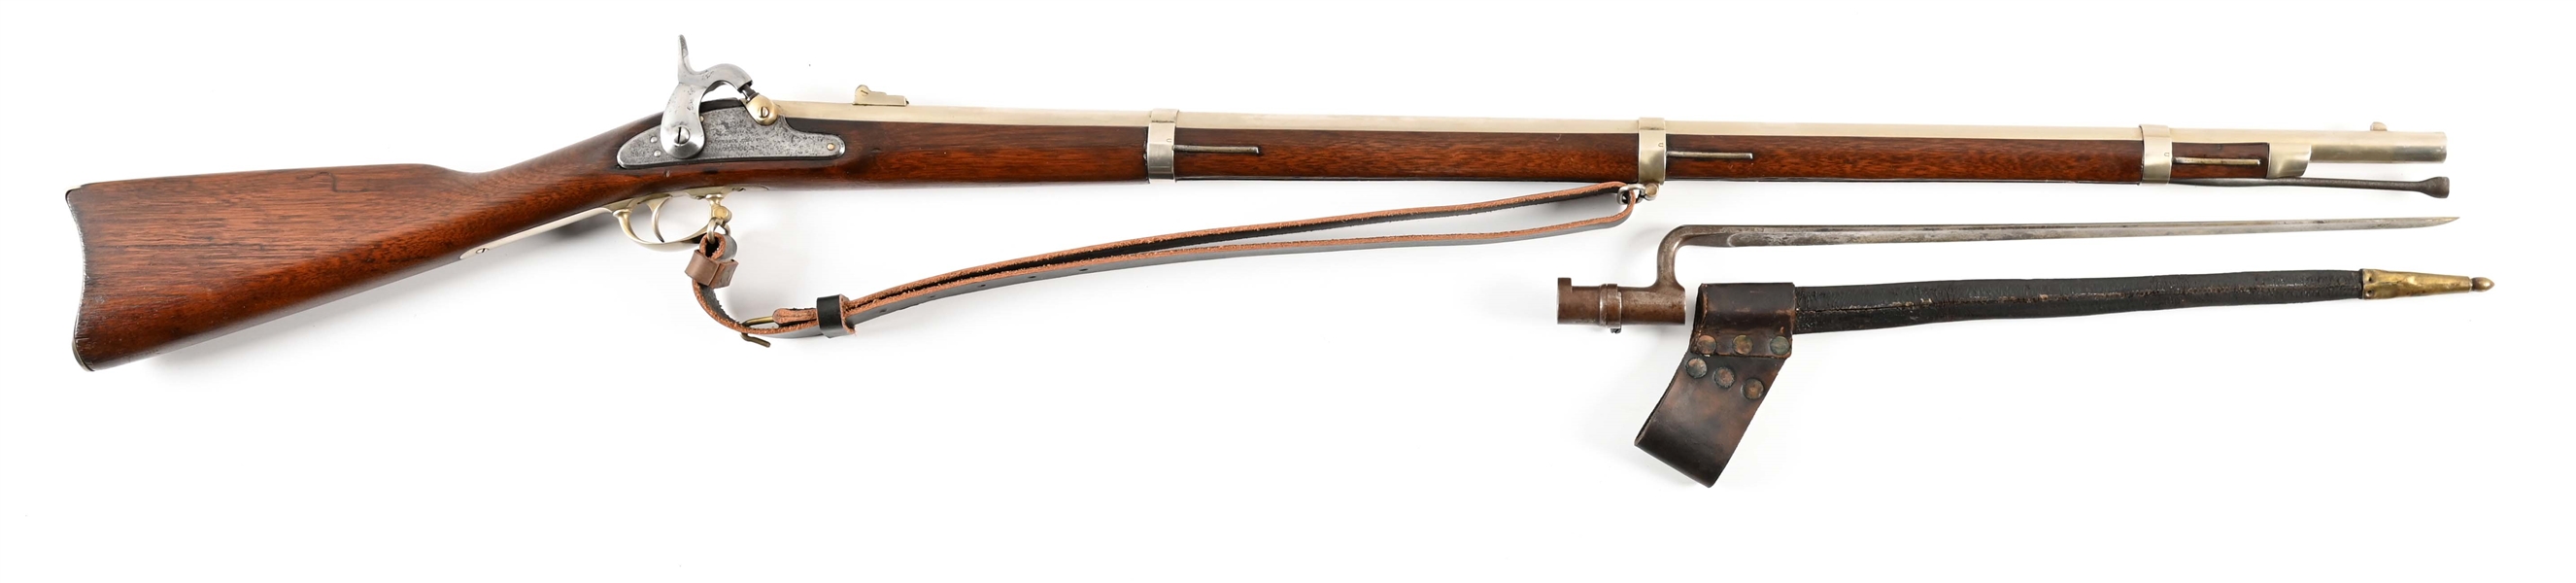 (A) PROVIDENCE TOOL CO. MODEL 1861 MUSKET WITH BAYONET.